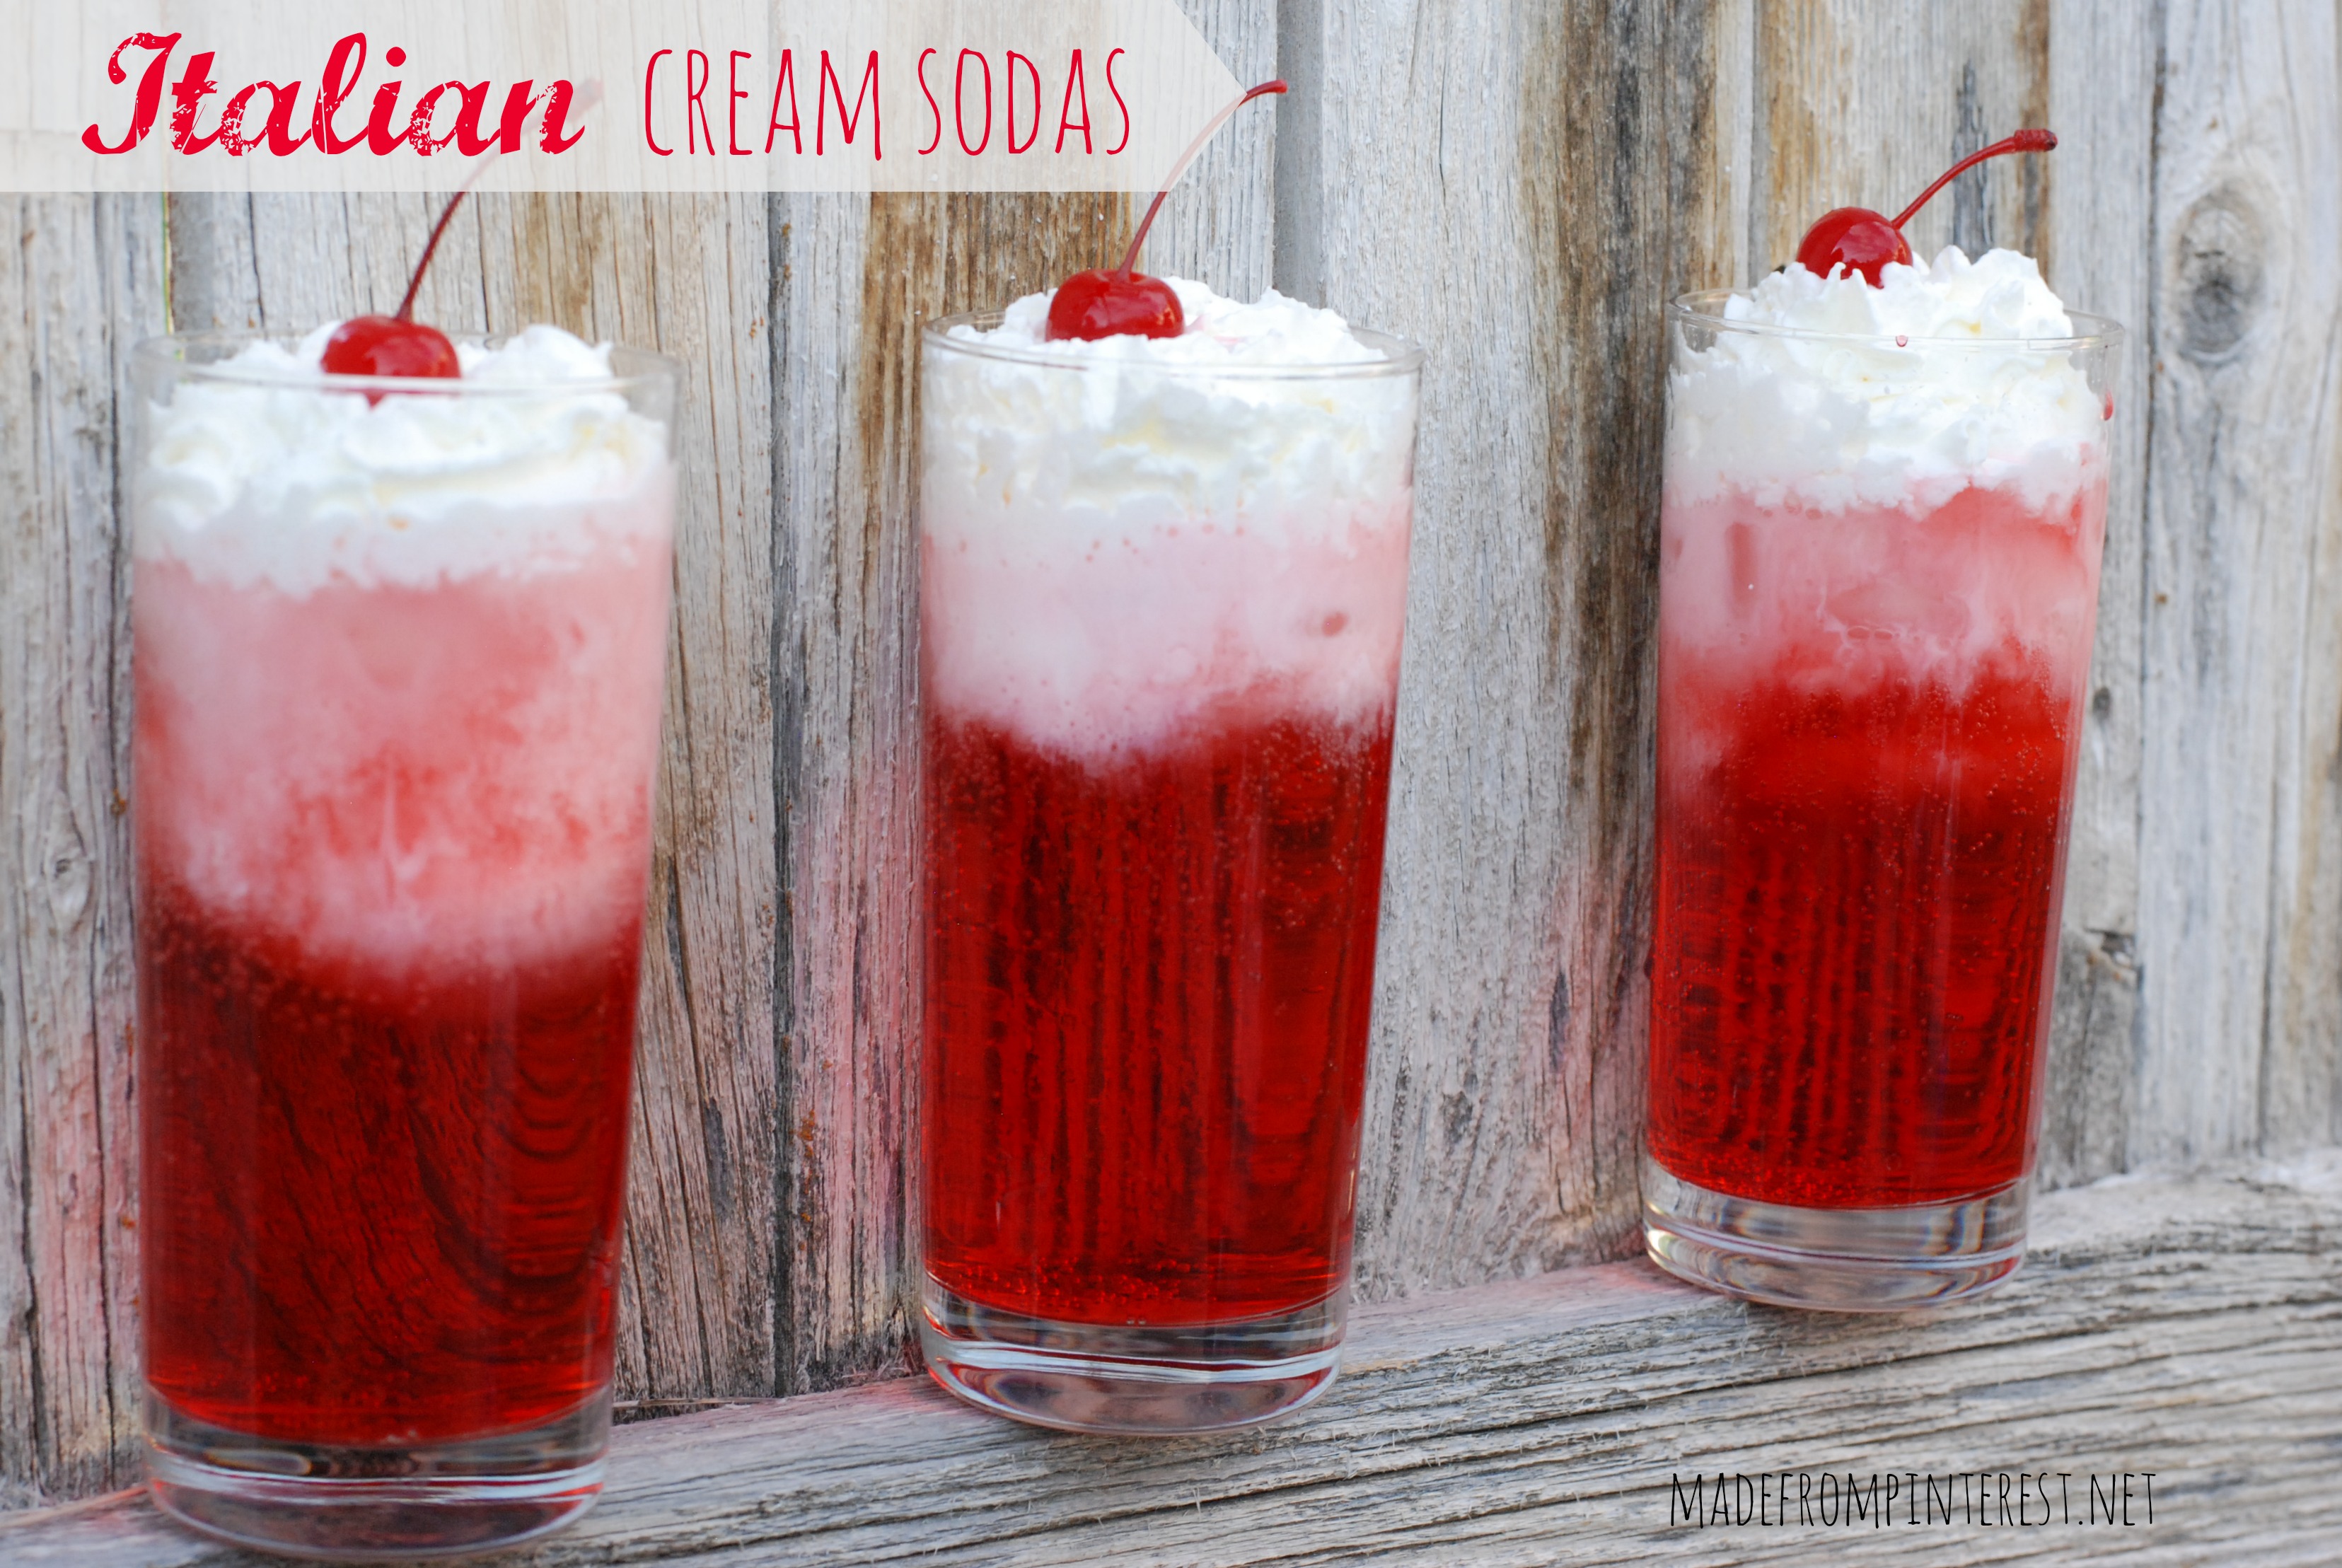 Make your own Italian Cream Sodas. Lots of flavors to choose from and much cheaper too! madefrompinterest.net